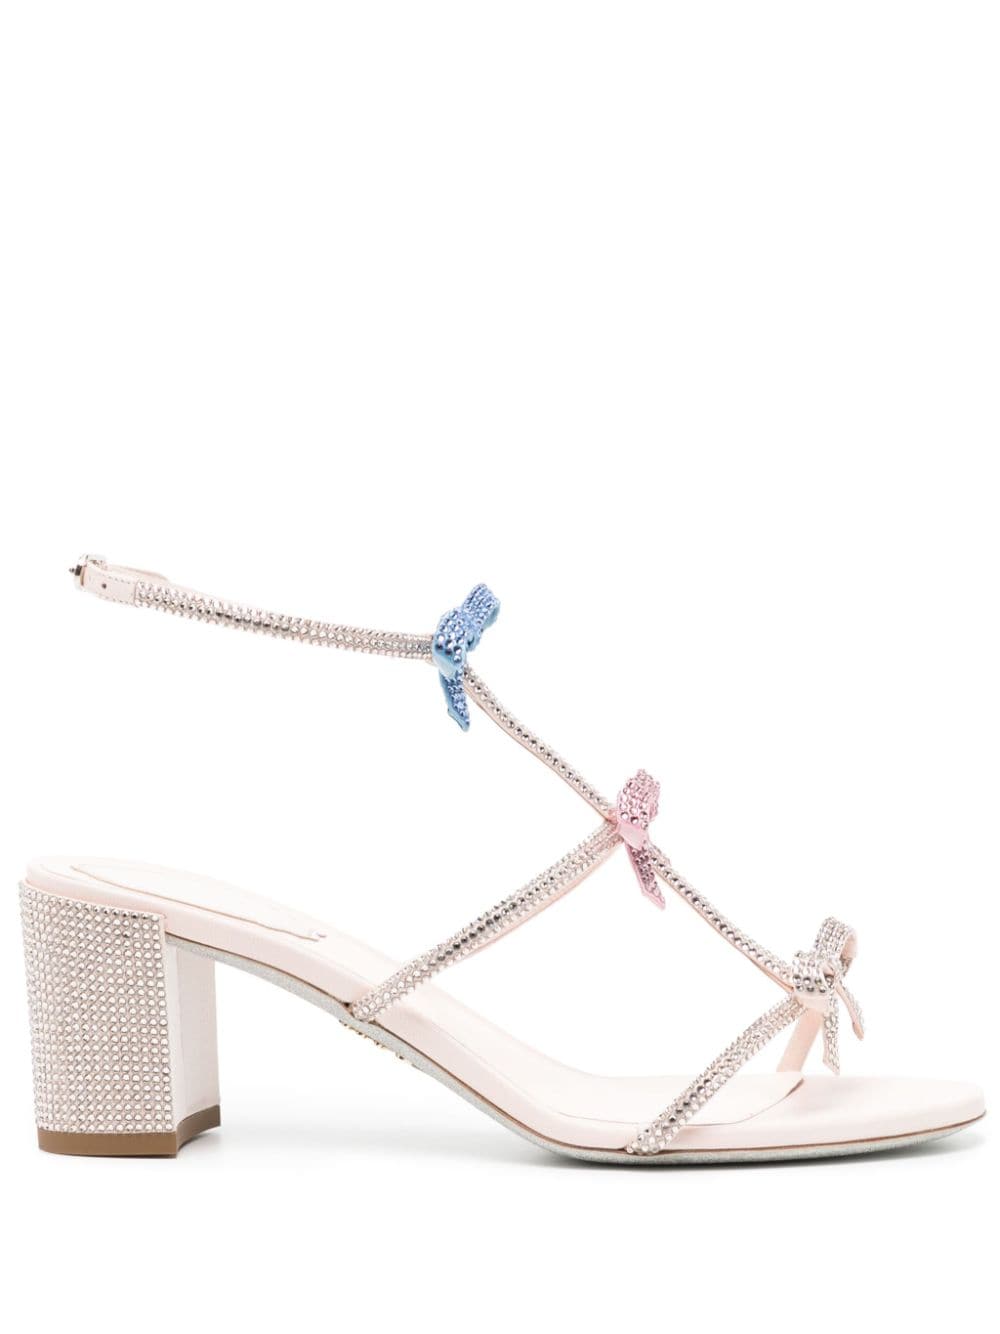 René Caovilla Caterina Embellished Leather Sandals In Pink